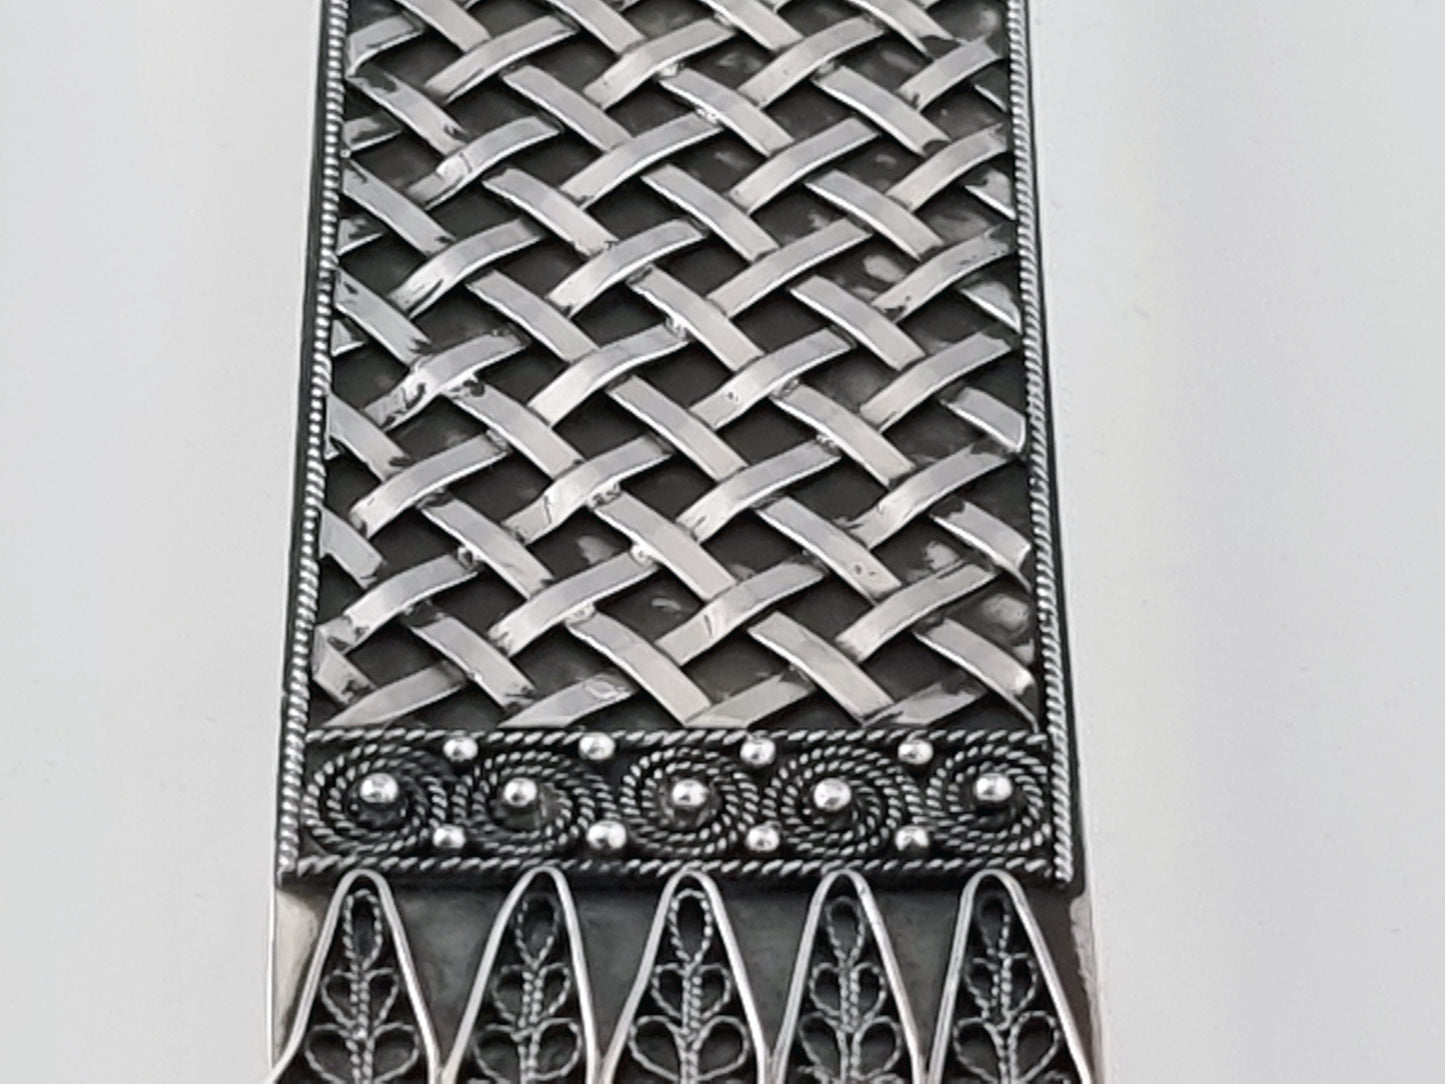 Loops, twists and lattice made of 925 sterling on a Chumash Mezuzah